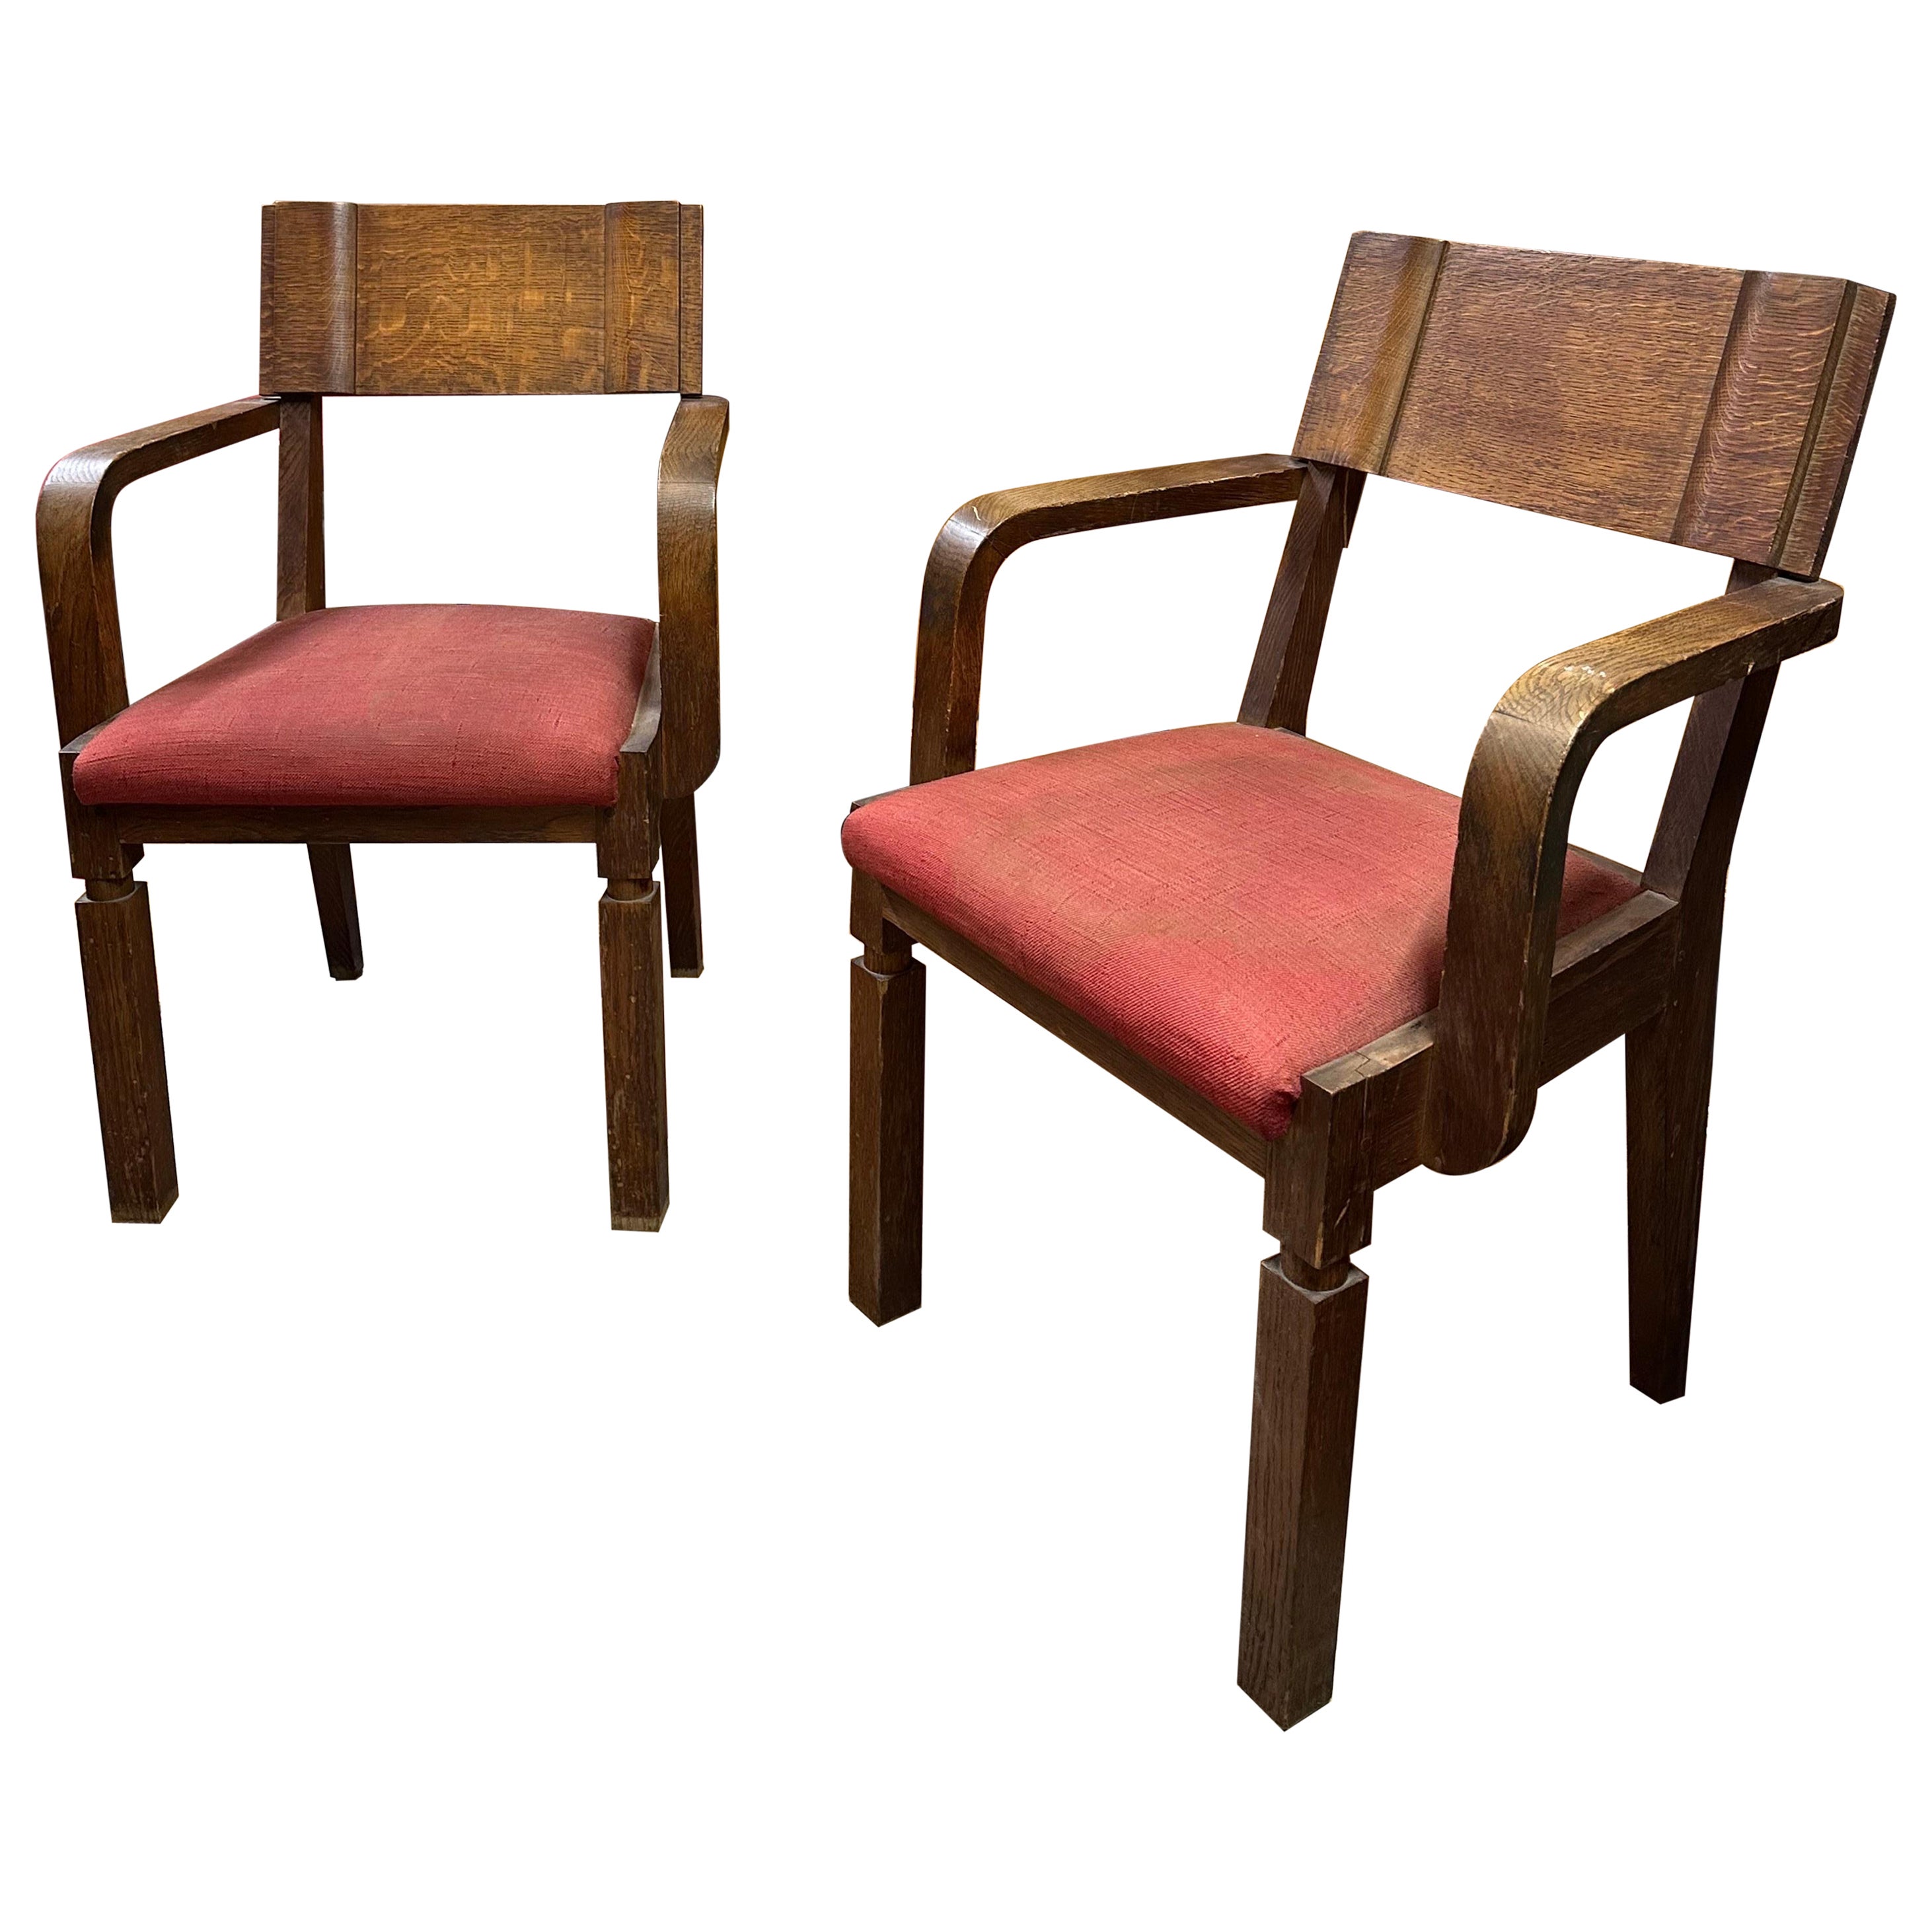 Pair of Bridge Chairs Signed Charles Dudouyt